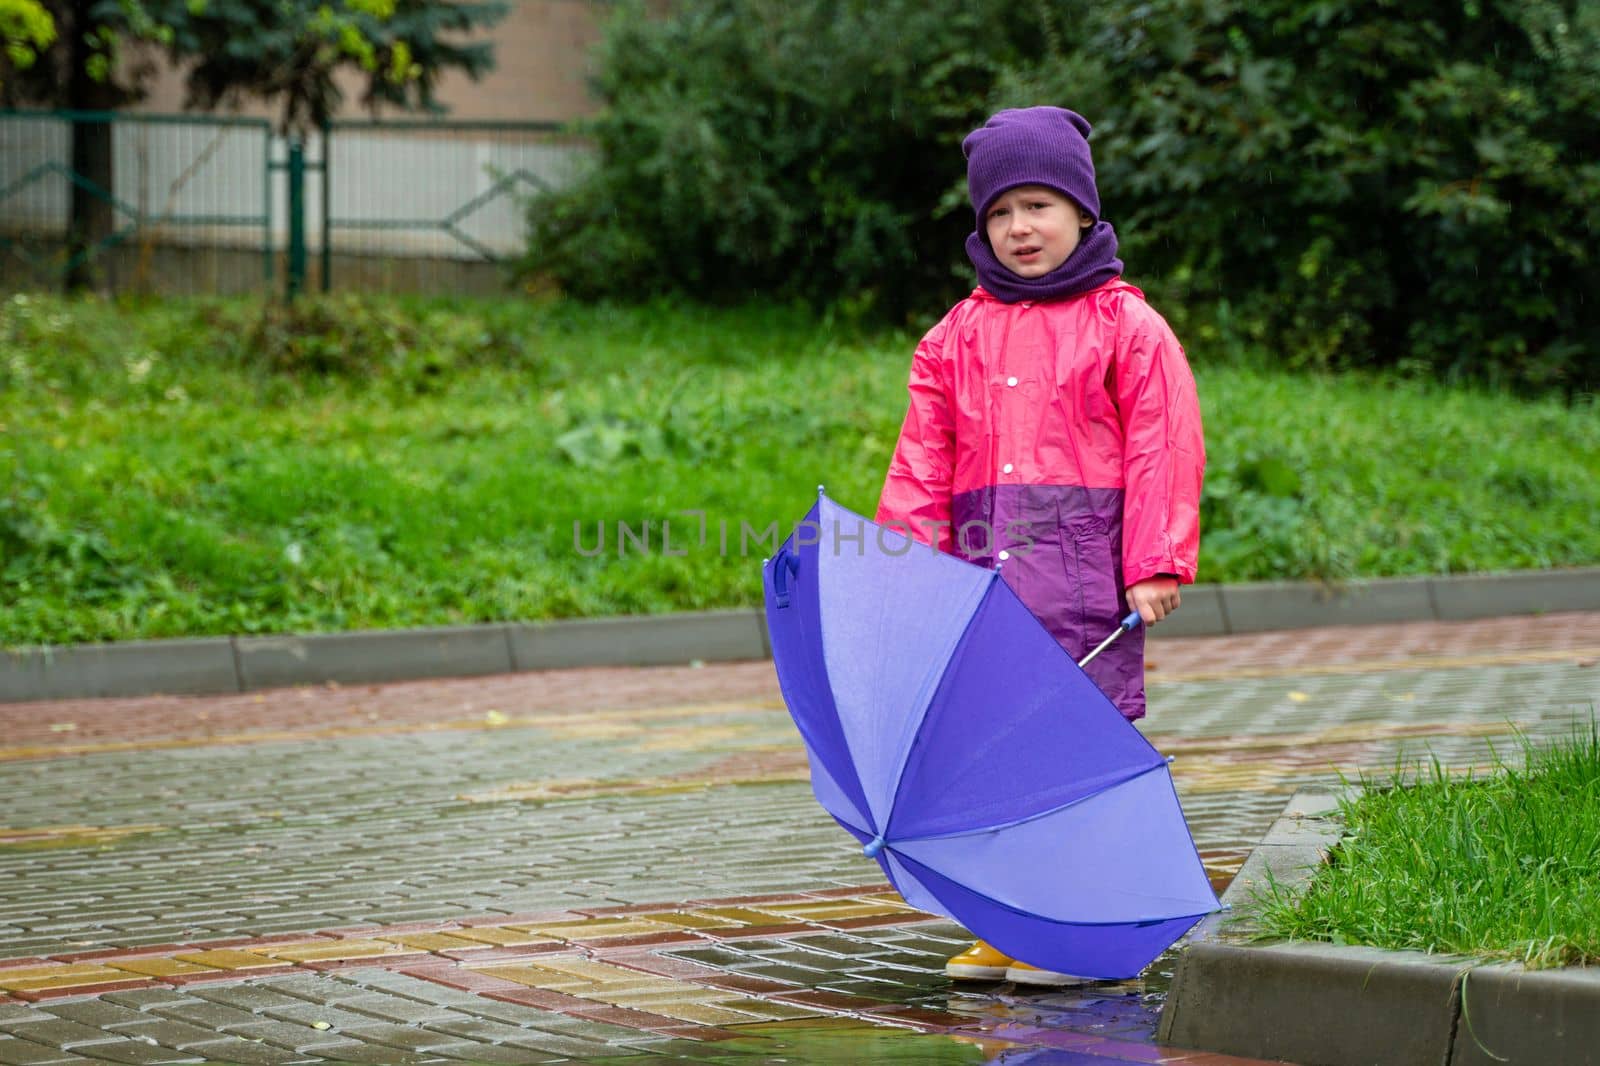 Child with an umbrella walks in the rain. Little boy with umbrella outdoors by voffka23